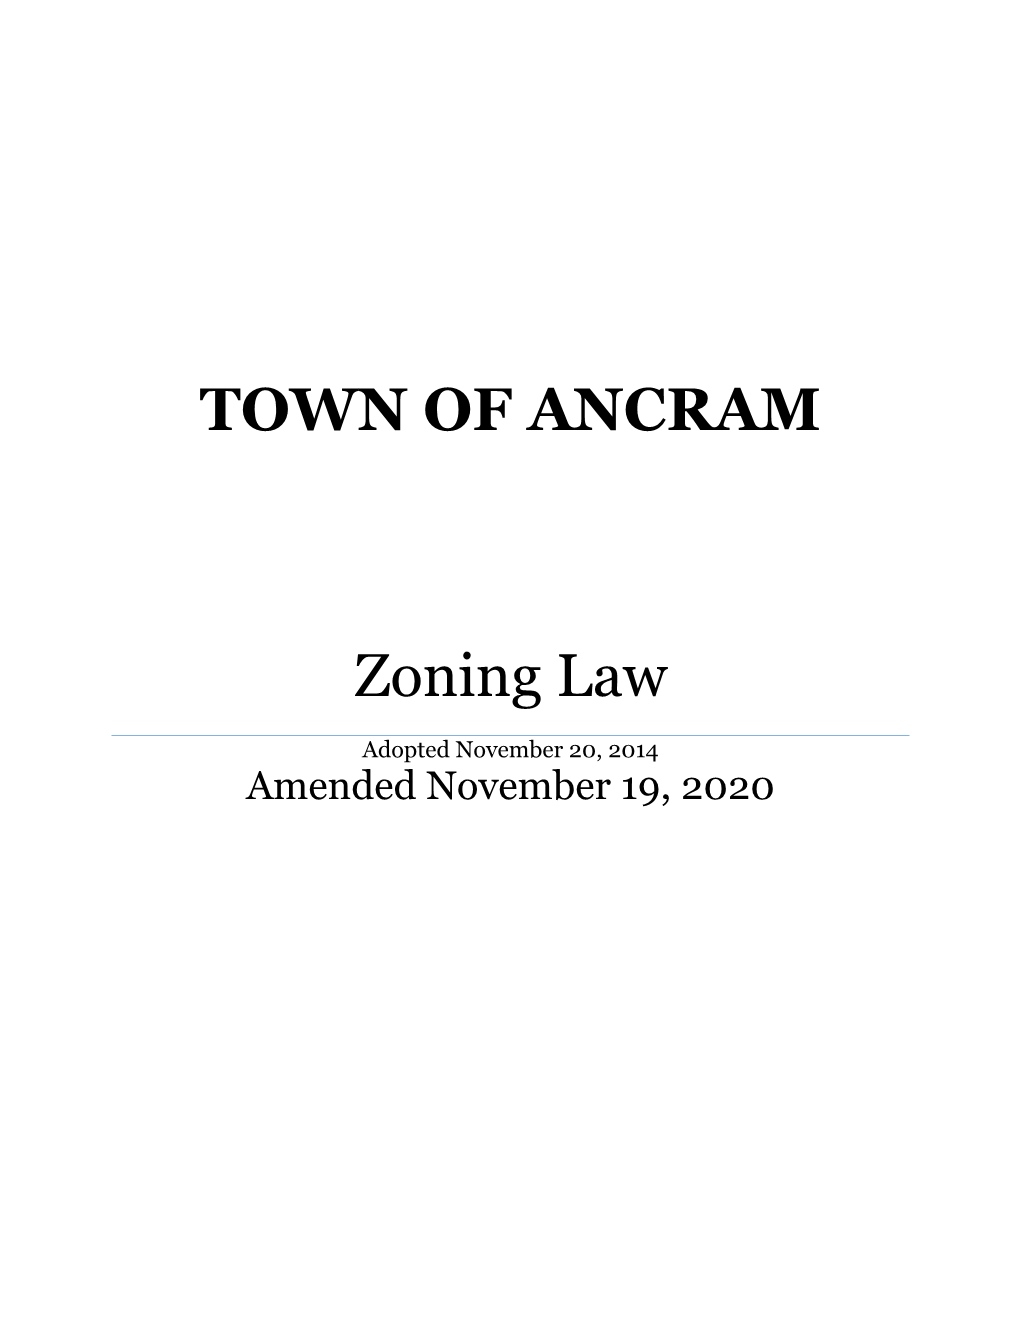 Zoning Law, Amended 2020